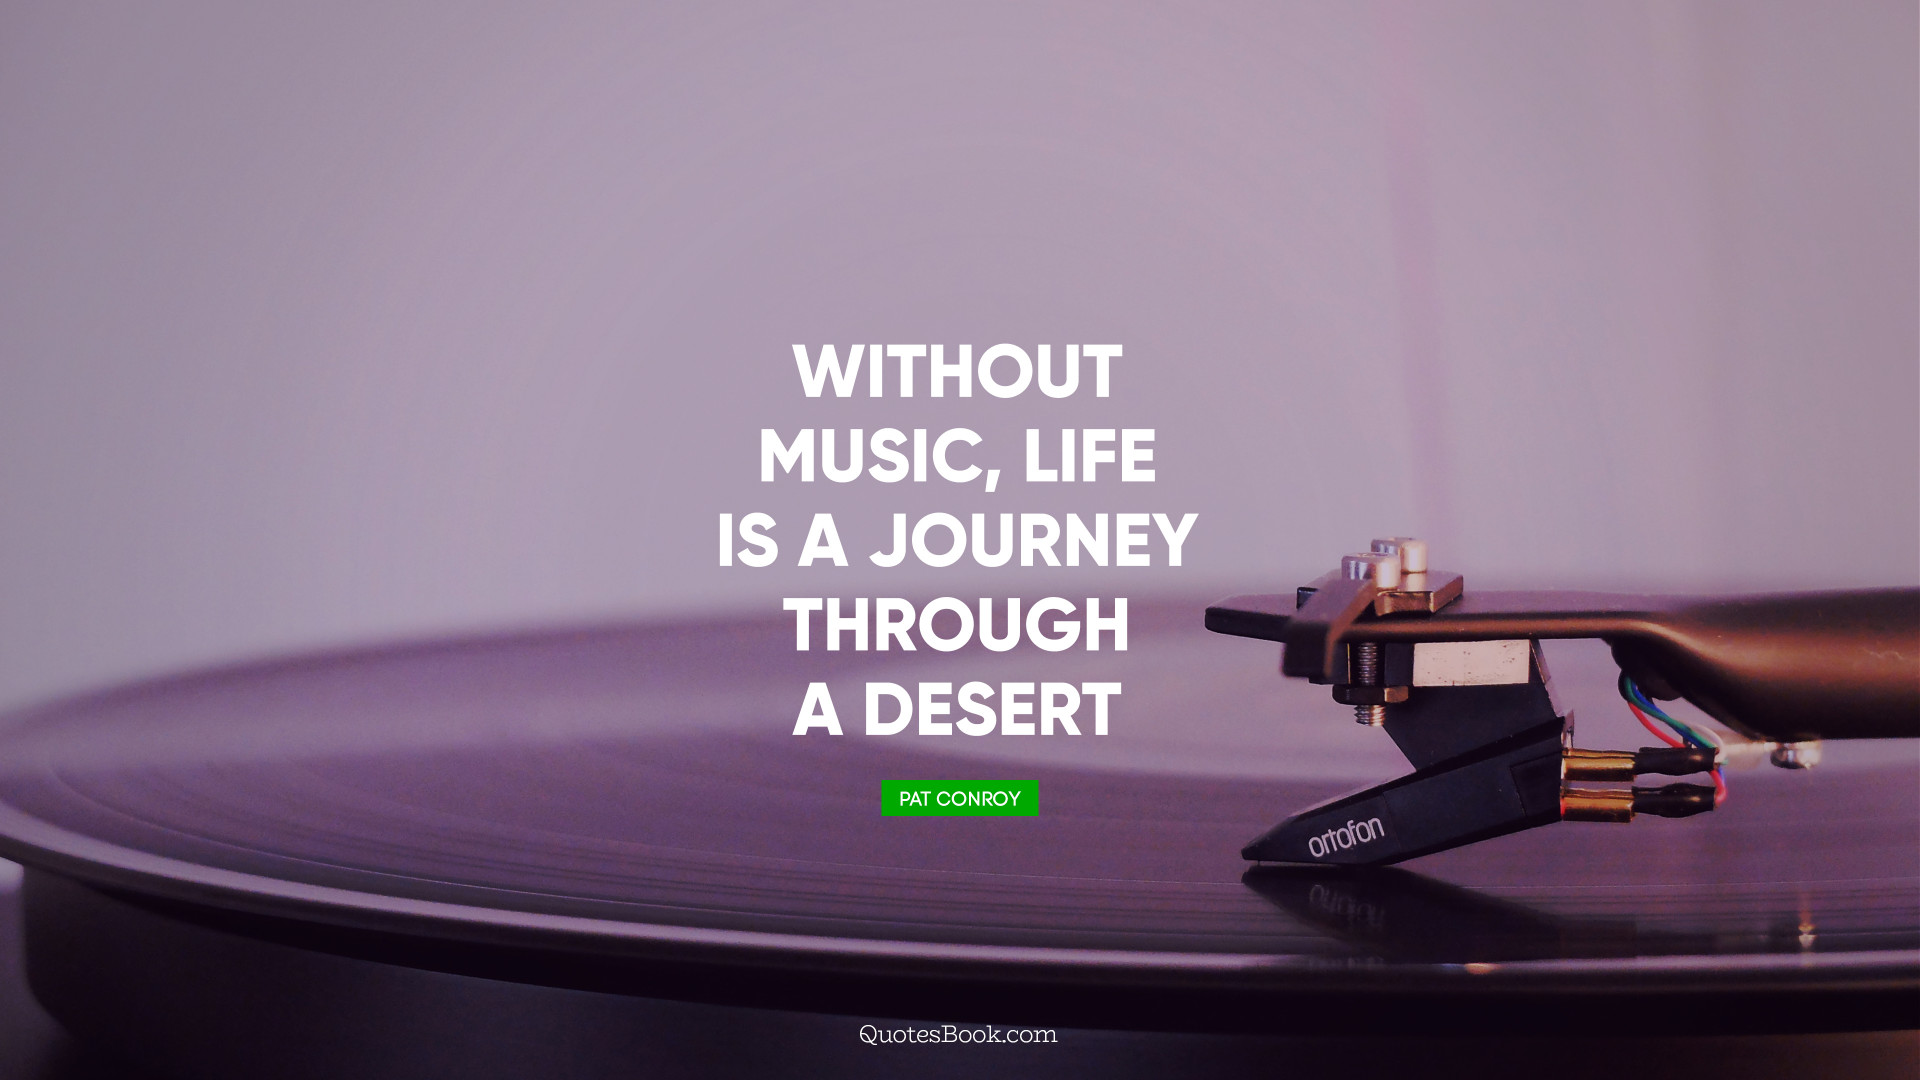 Without music, life is a journey through a desert. - Quote by Pat